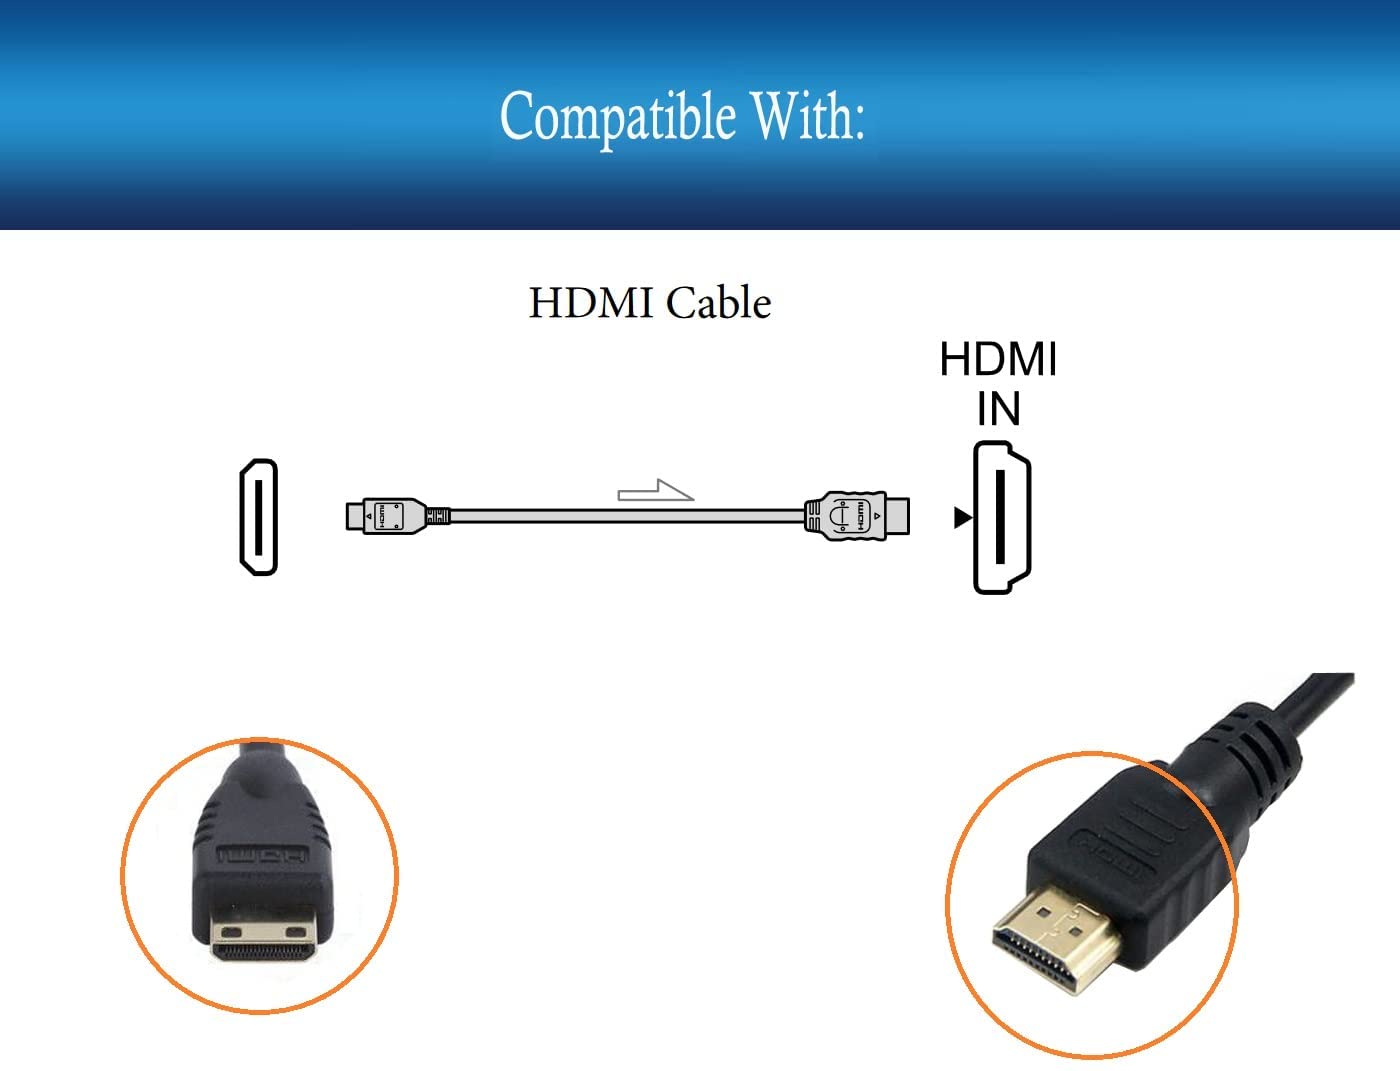 UPBRIGHT New HDMI Cable to HDTV HD TV Audio Video AV Cord Lead For Flytouch III 3 7 Dual Camera Android WIFI Tablet PC - image 3 of 5